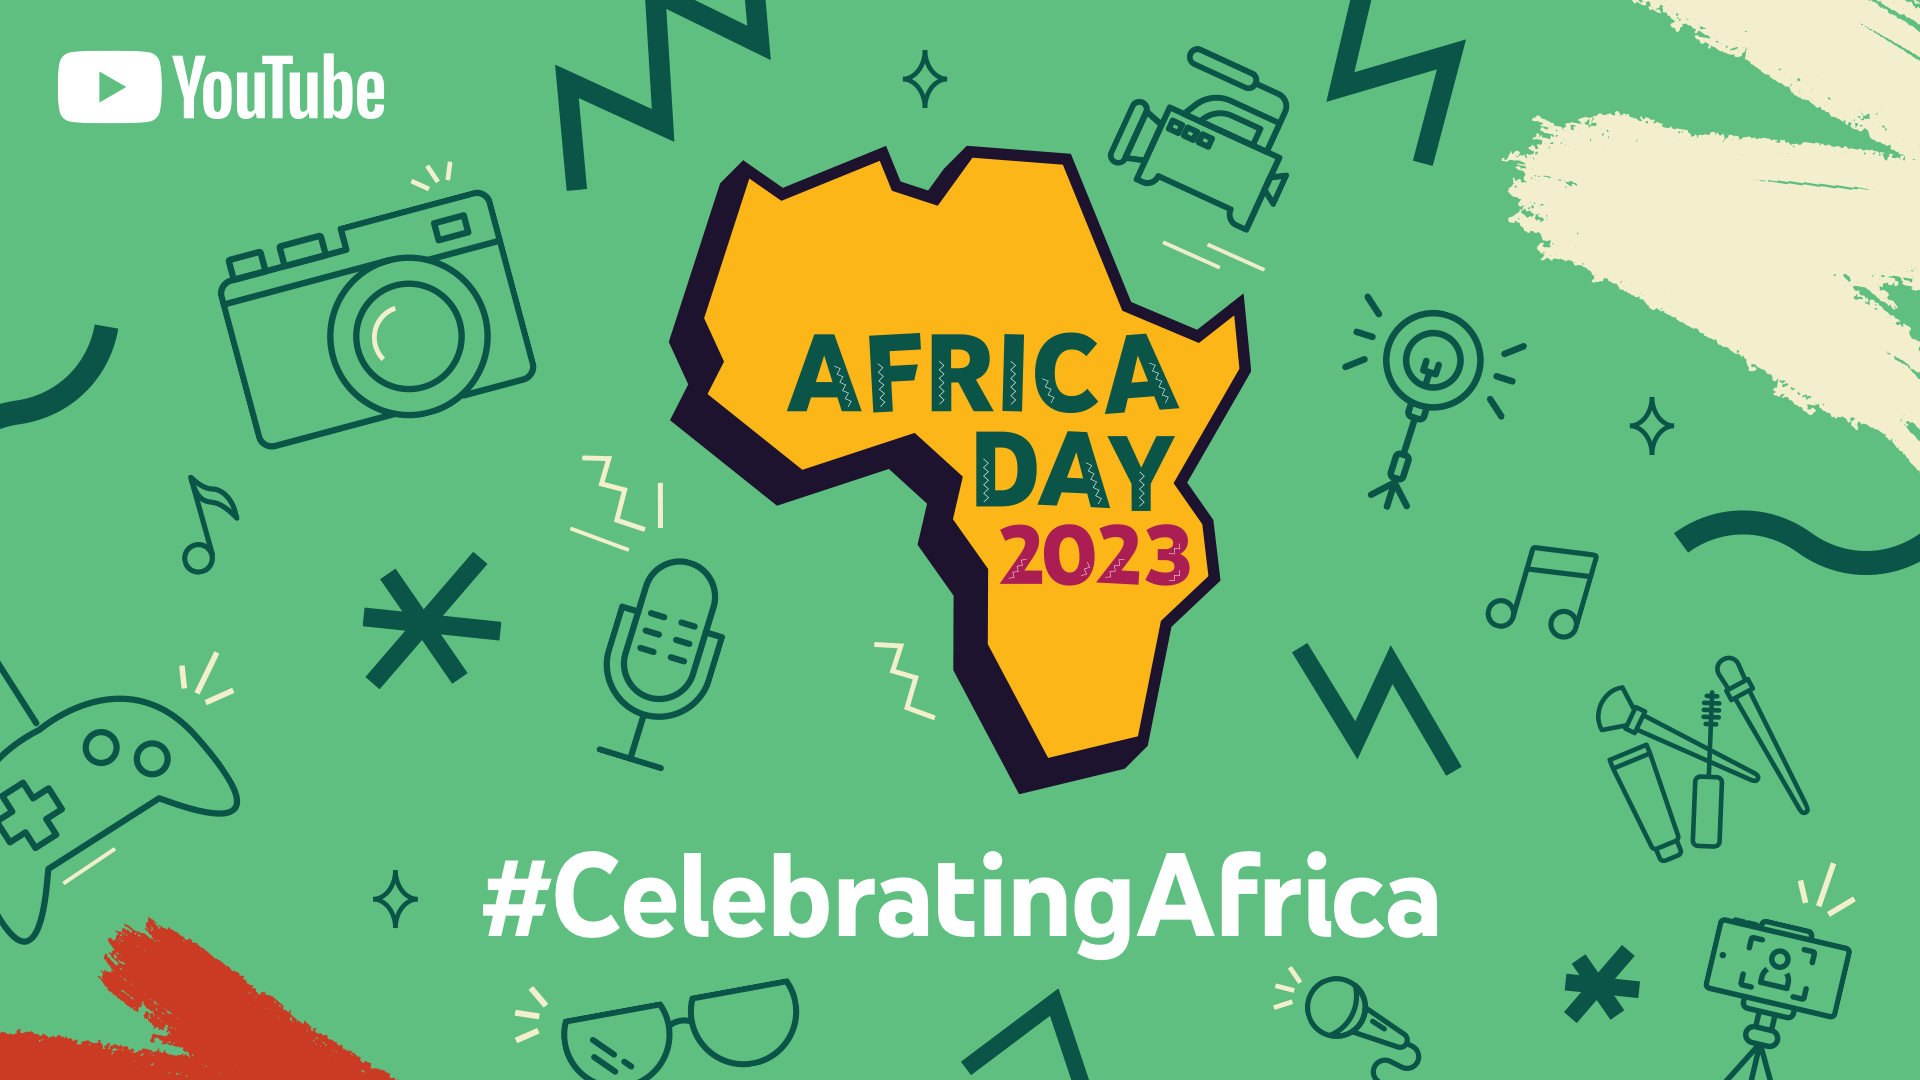 to celebrate Africa Day